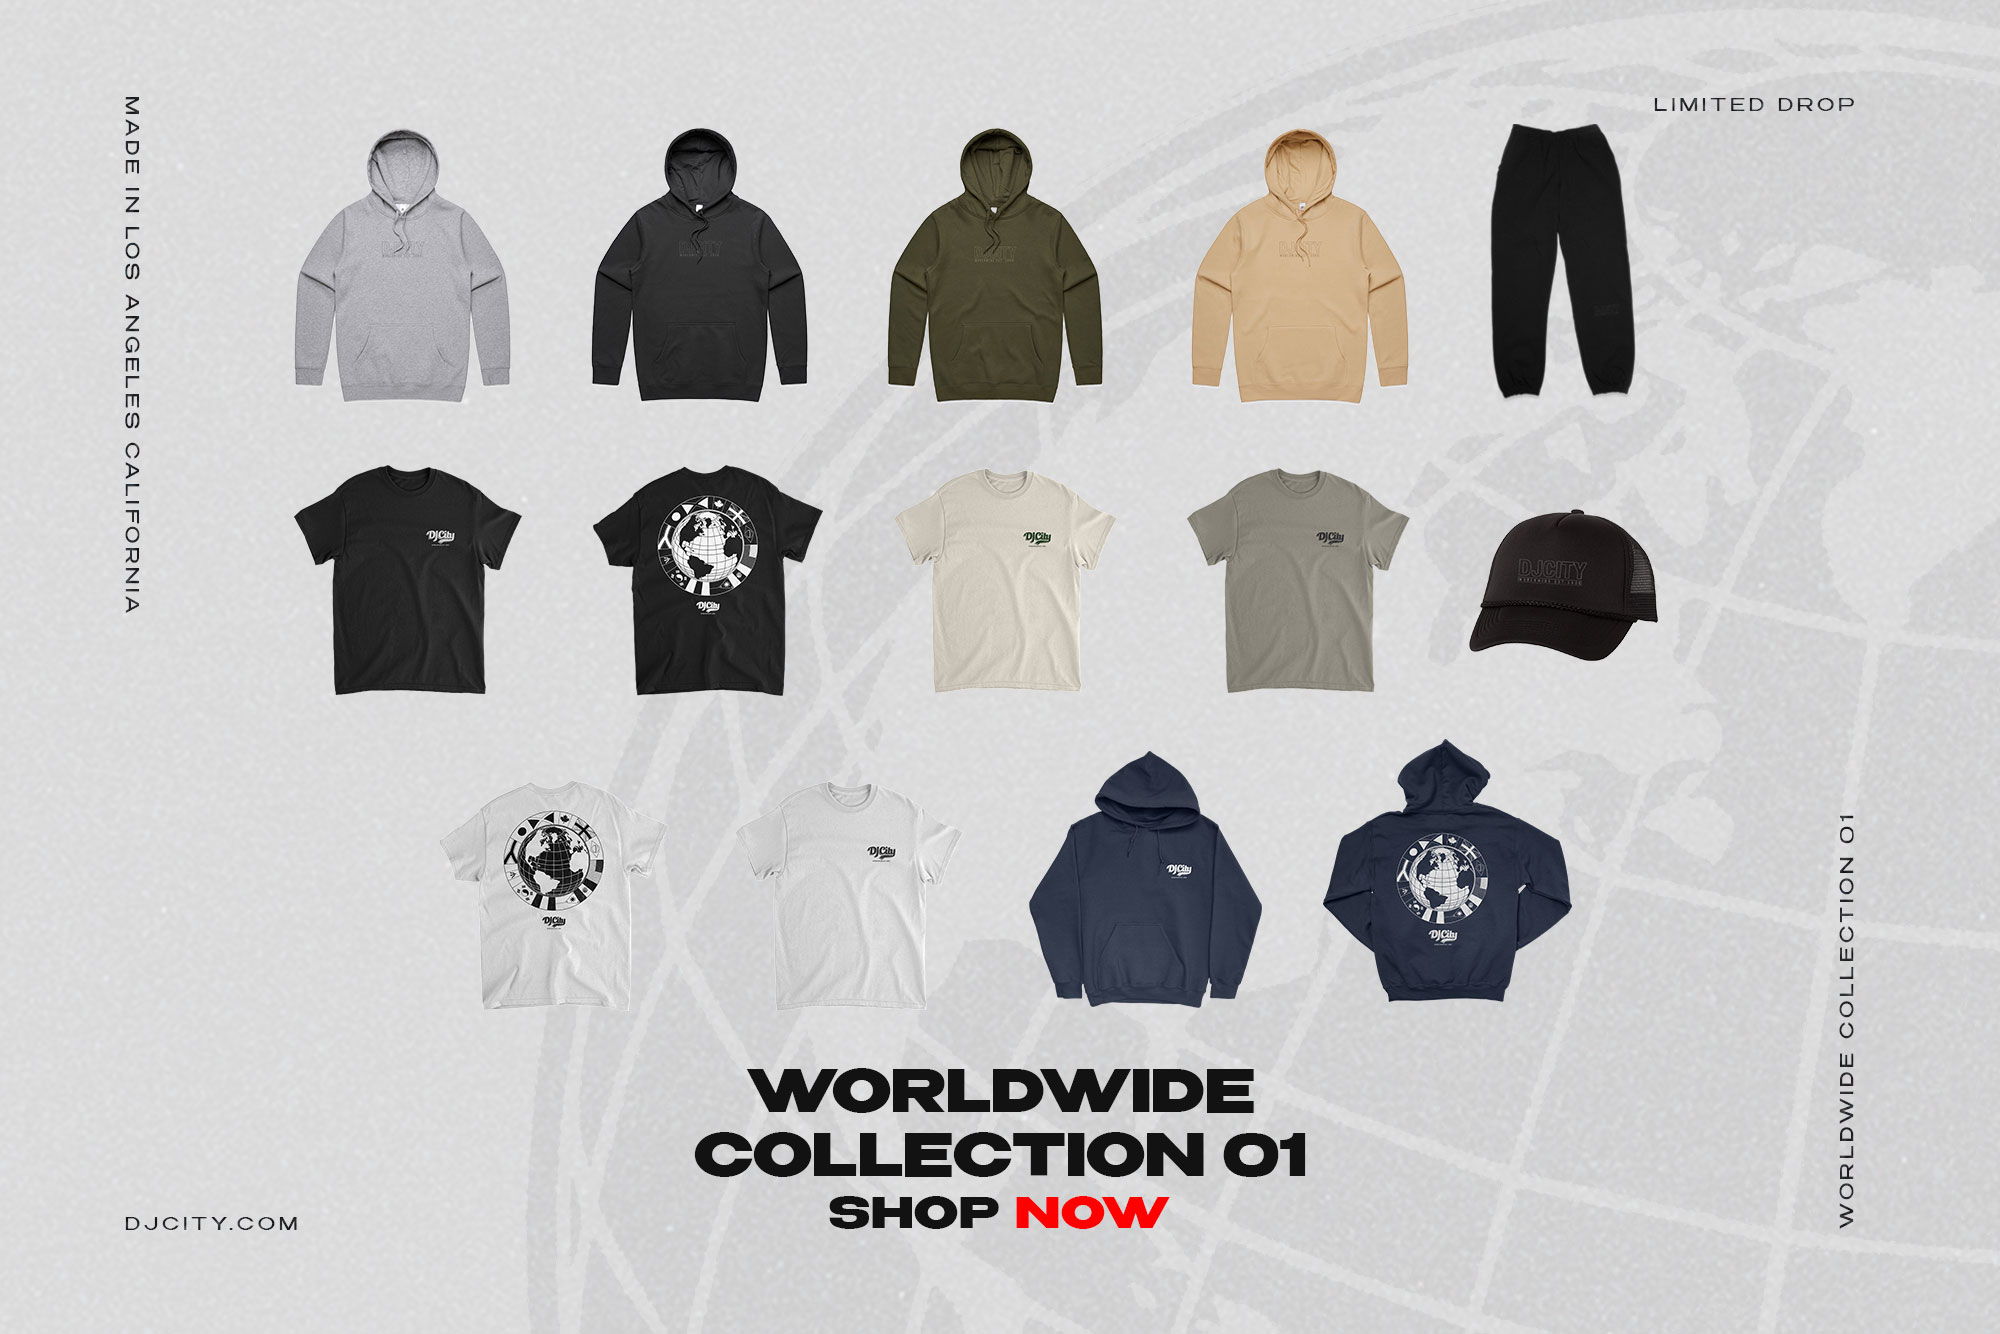 Worldwide Collection 01: Group Shot